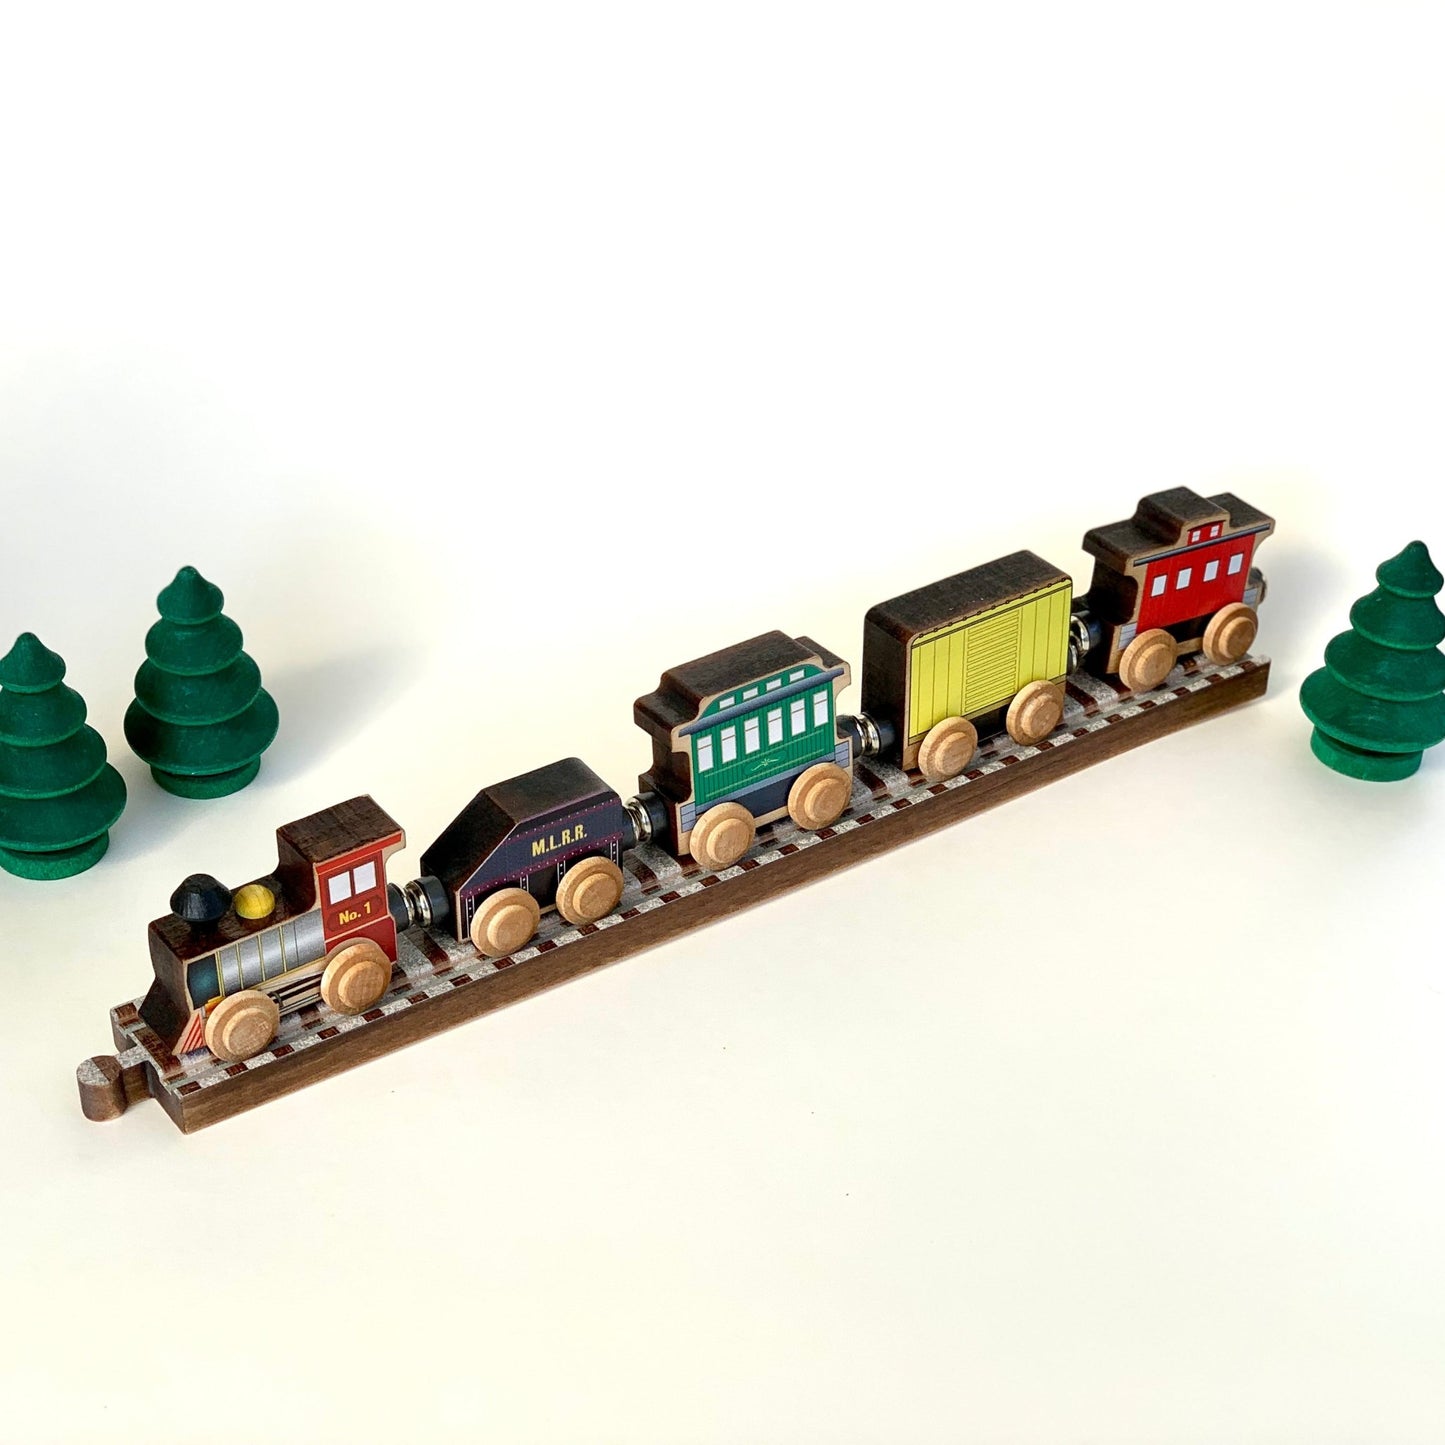 Classic Wooden Train Car Set - Made in USA